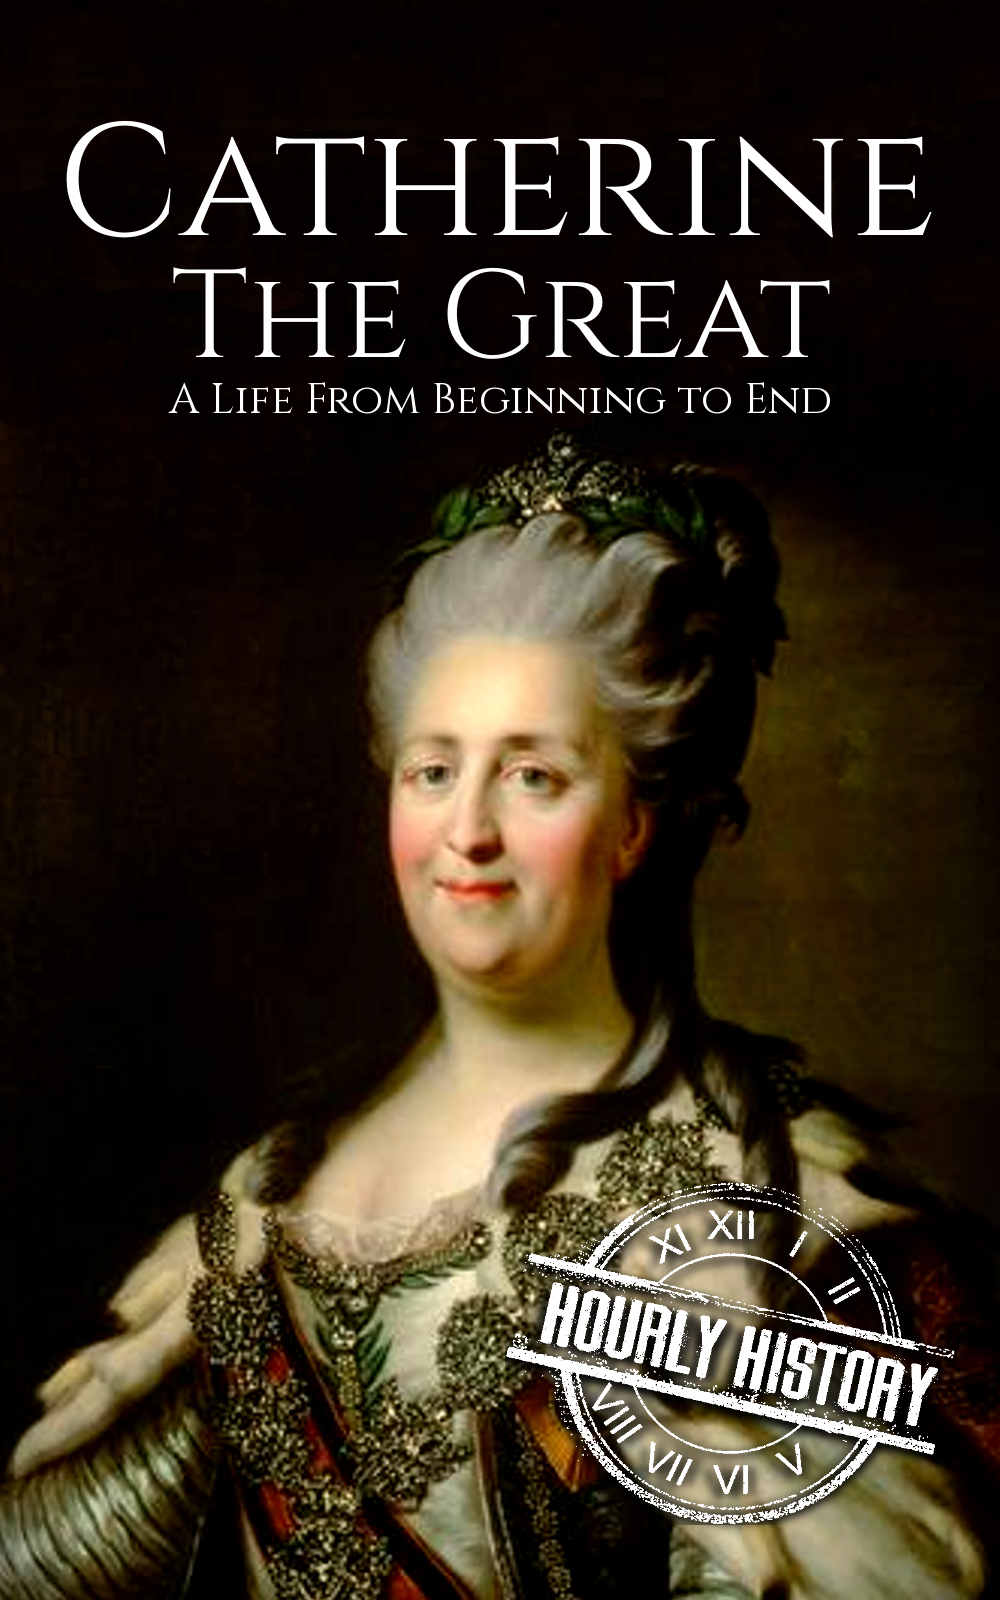 Catherine the Great: A Life From Beginning to End (Biographies of Women in History Book 7)